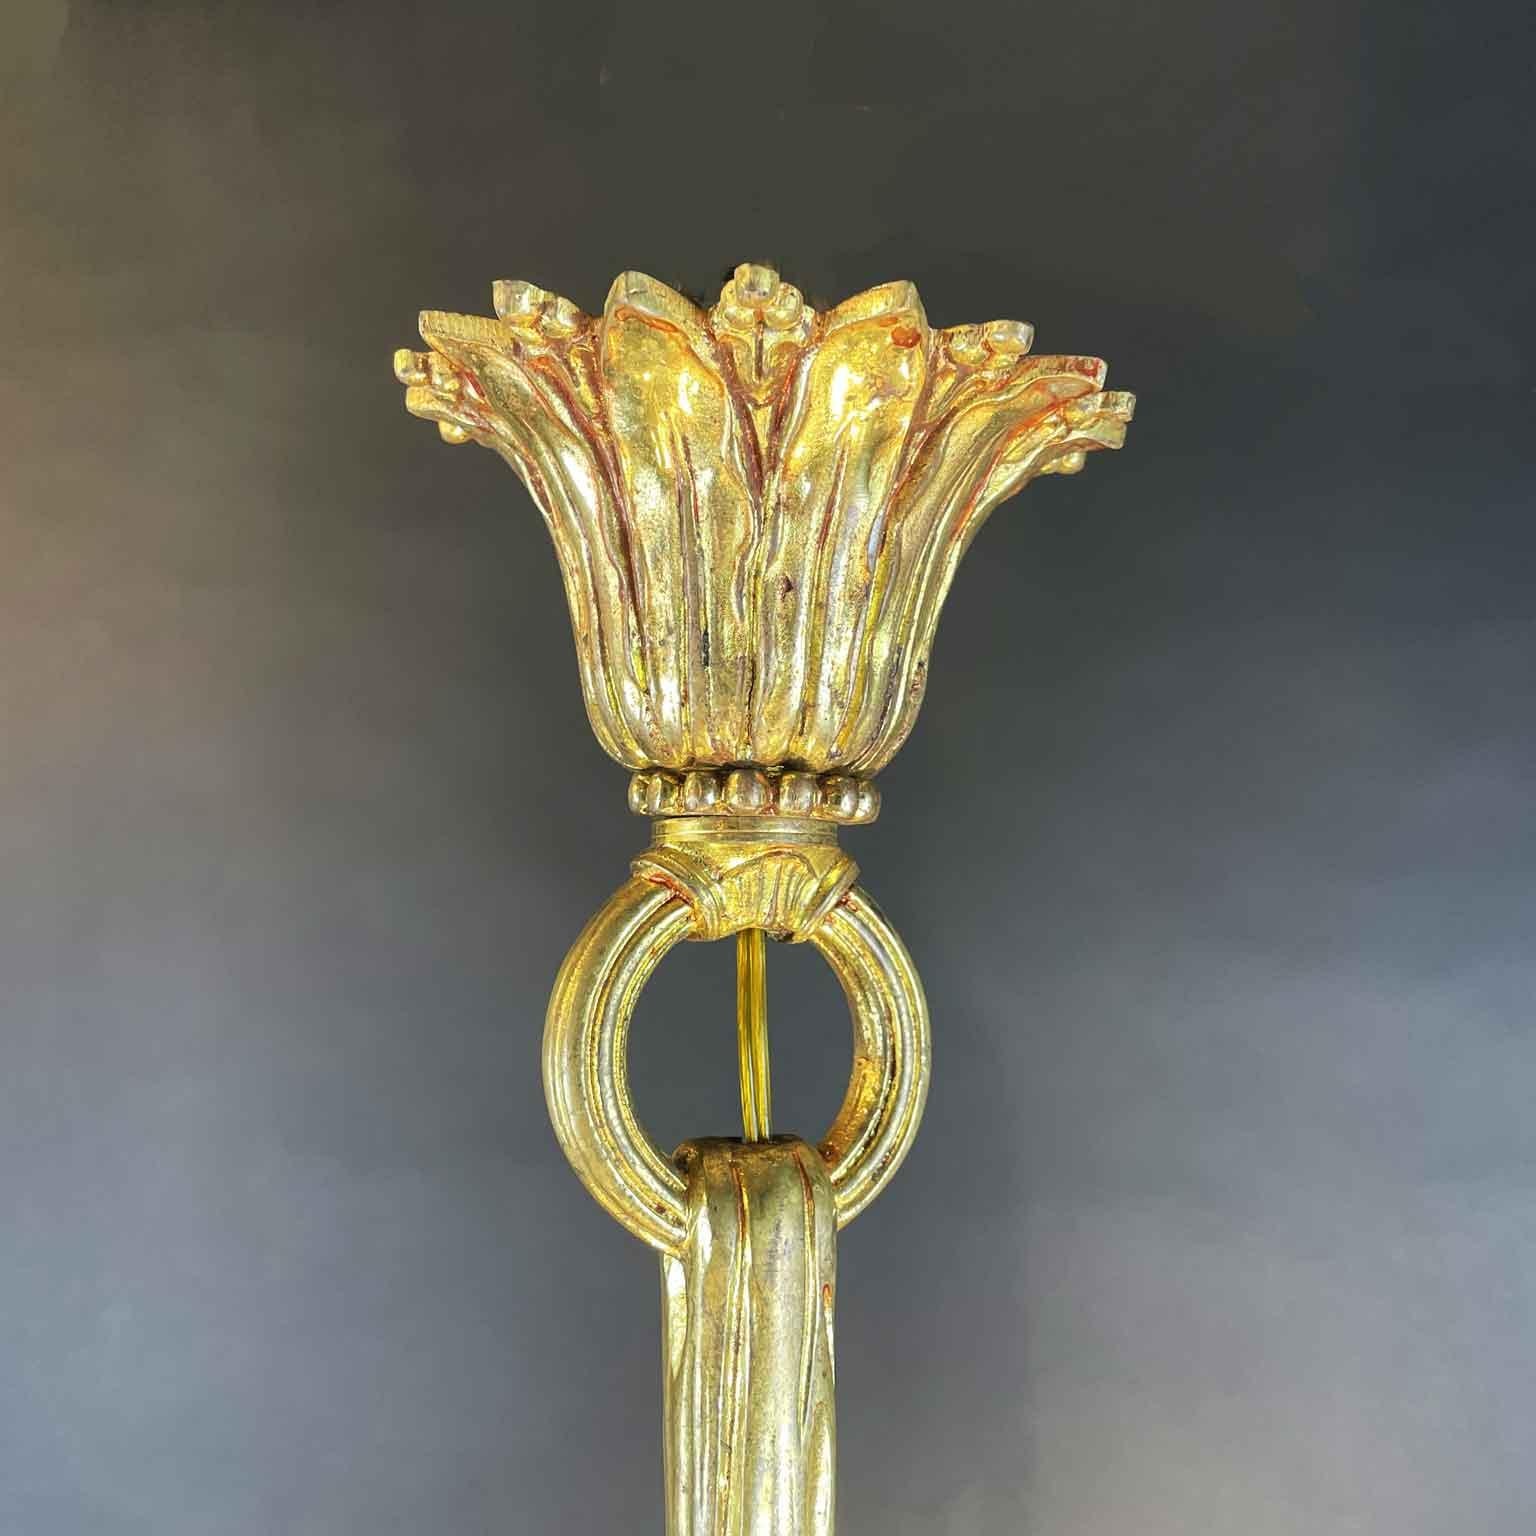 Baccarat Crystal and Ormolu Chandelier French 20th Century Empire Style Pendant 4